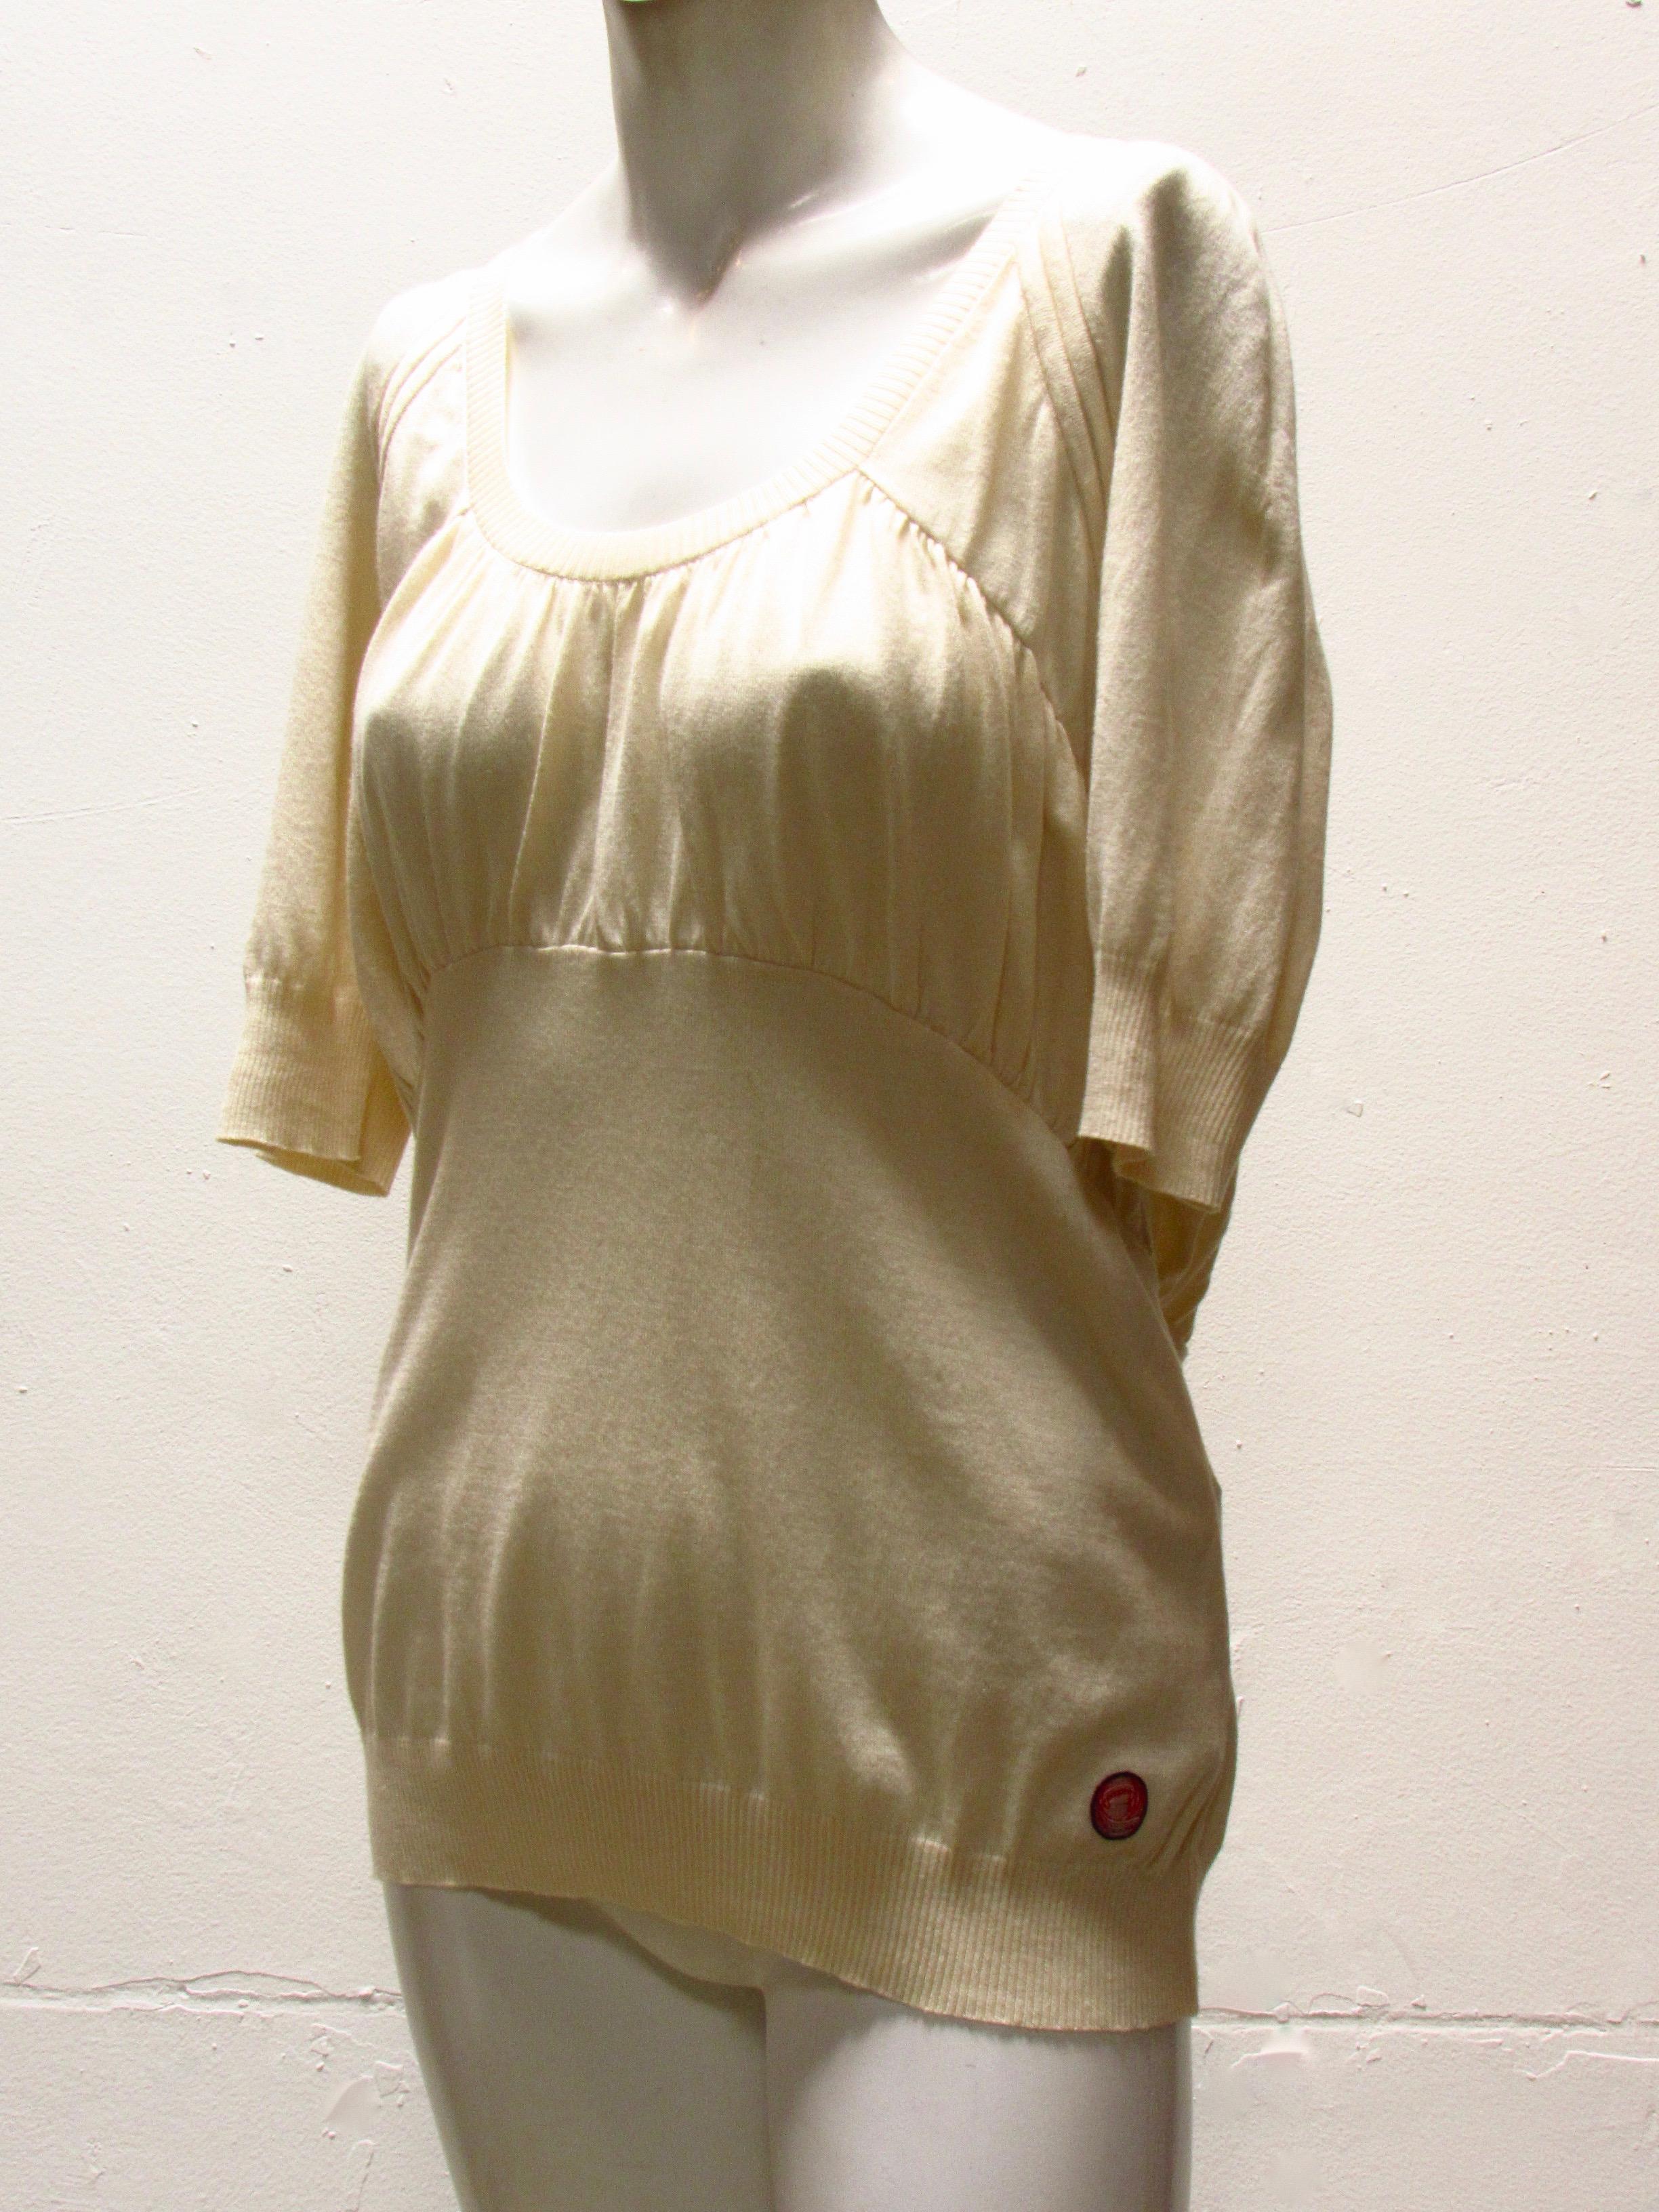 A delightfully feminine scoop neck top, from vintage Undercover. The cream-colored soft cotton/cashmere knit is gathered across the chest, continuing around to the back like a hug. Ribbed cuffs at elbows adds to the femininity of this style.